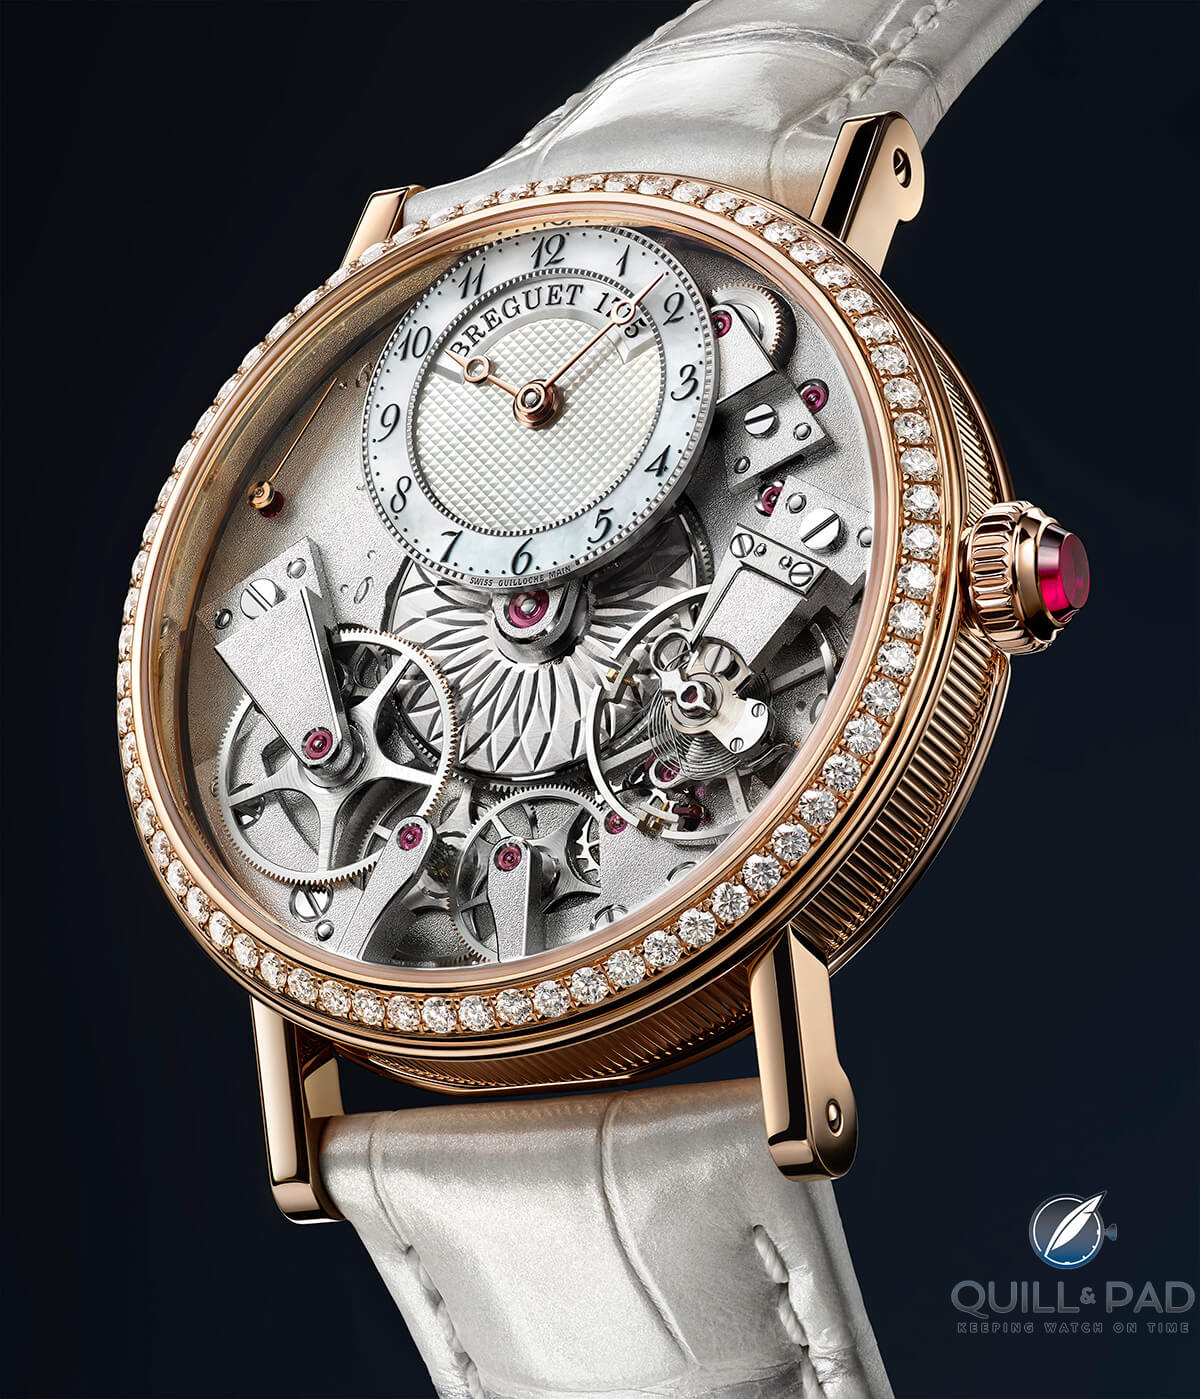 Breguet Tradition Dame Reference 7038